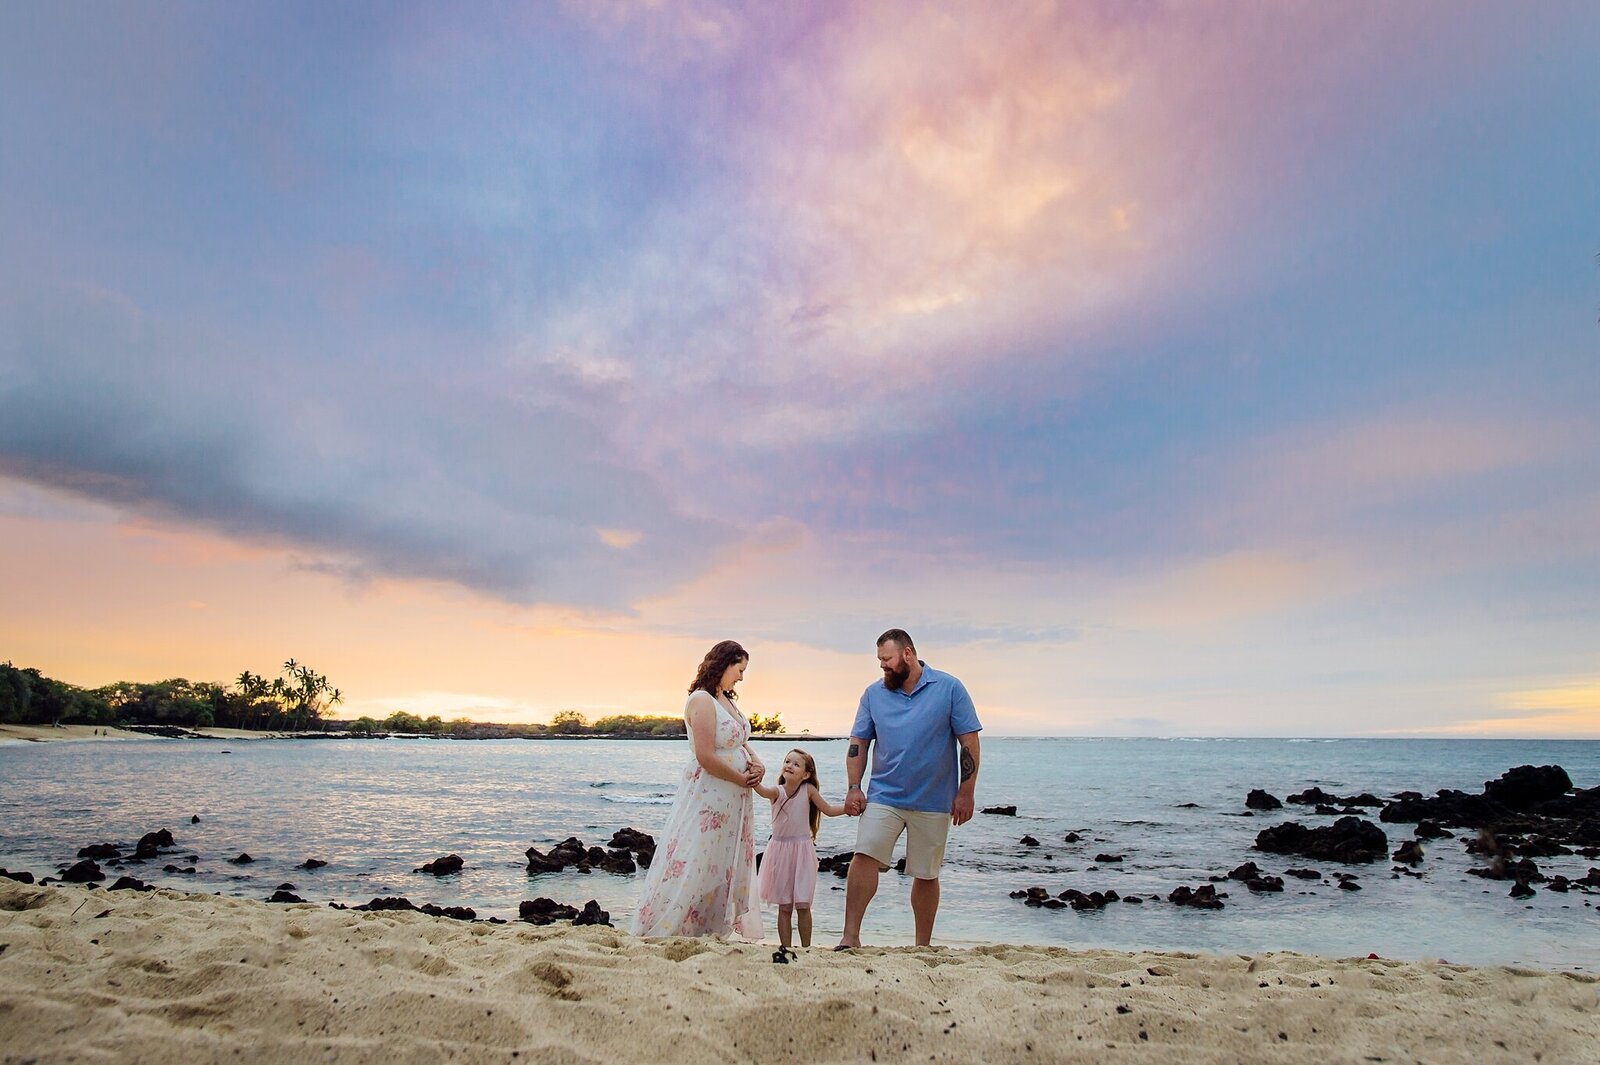 stunning sunset during this maternity session